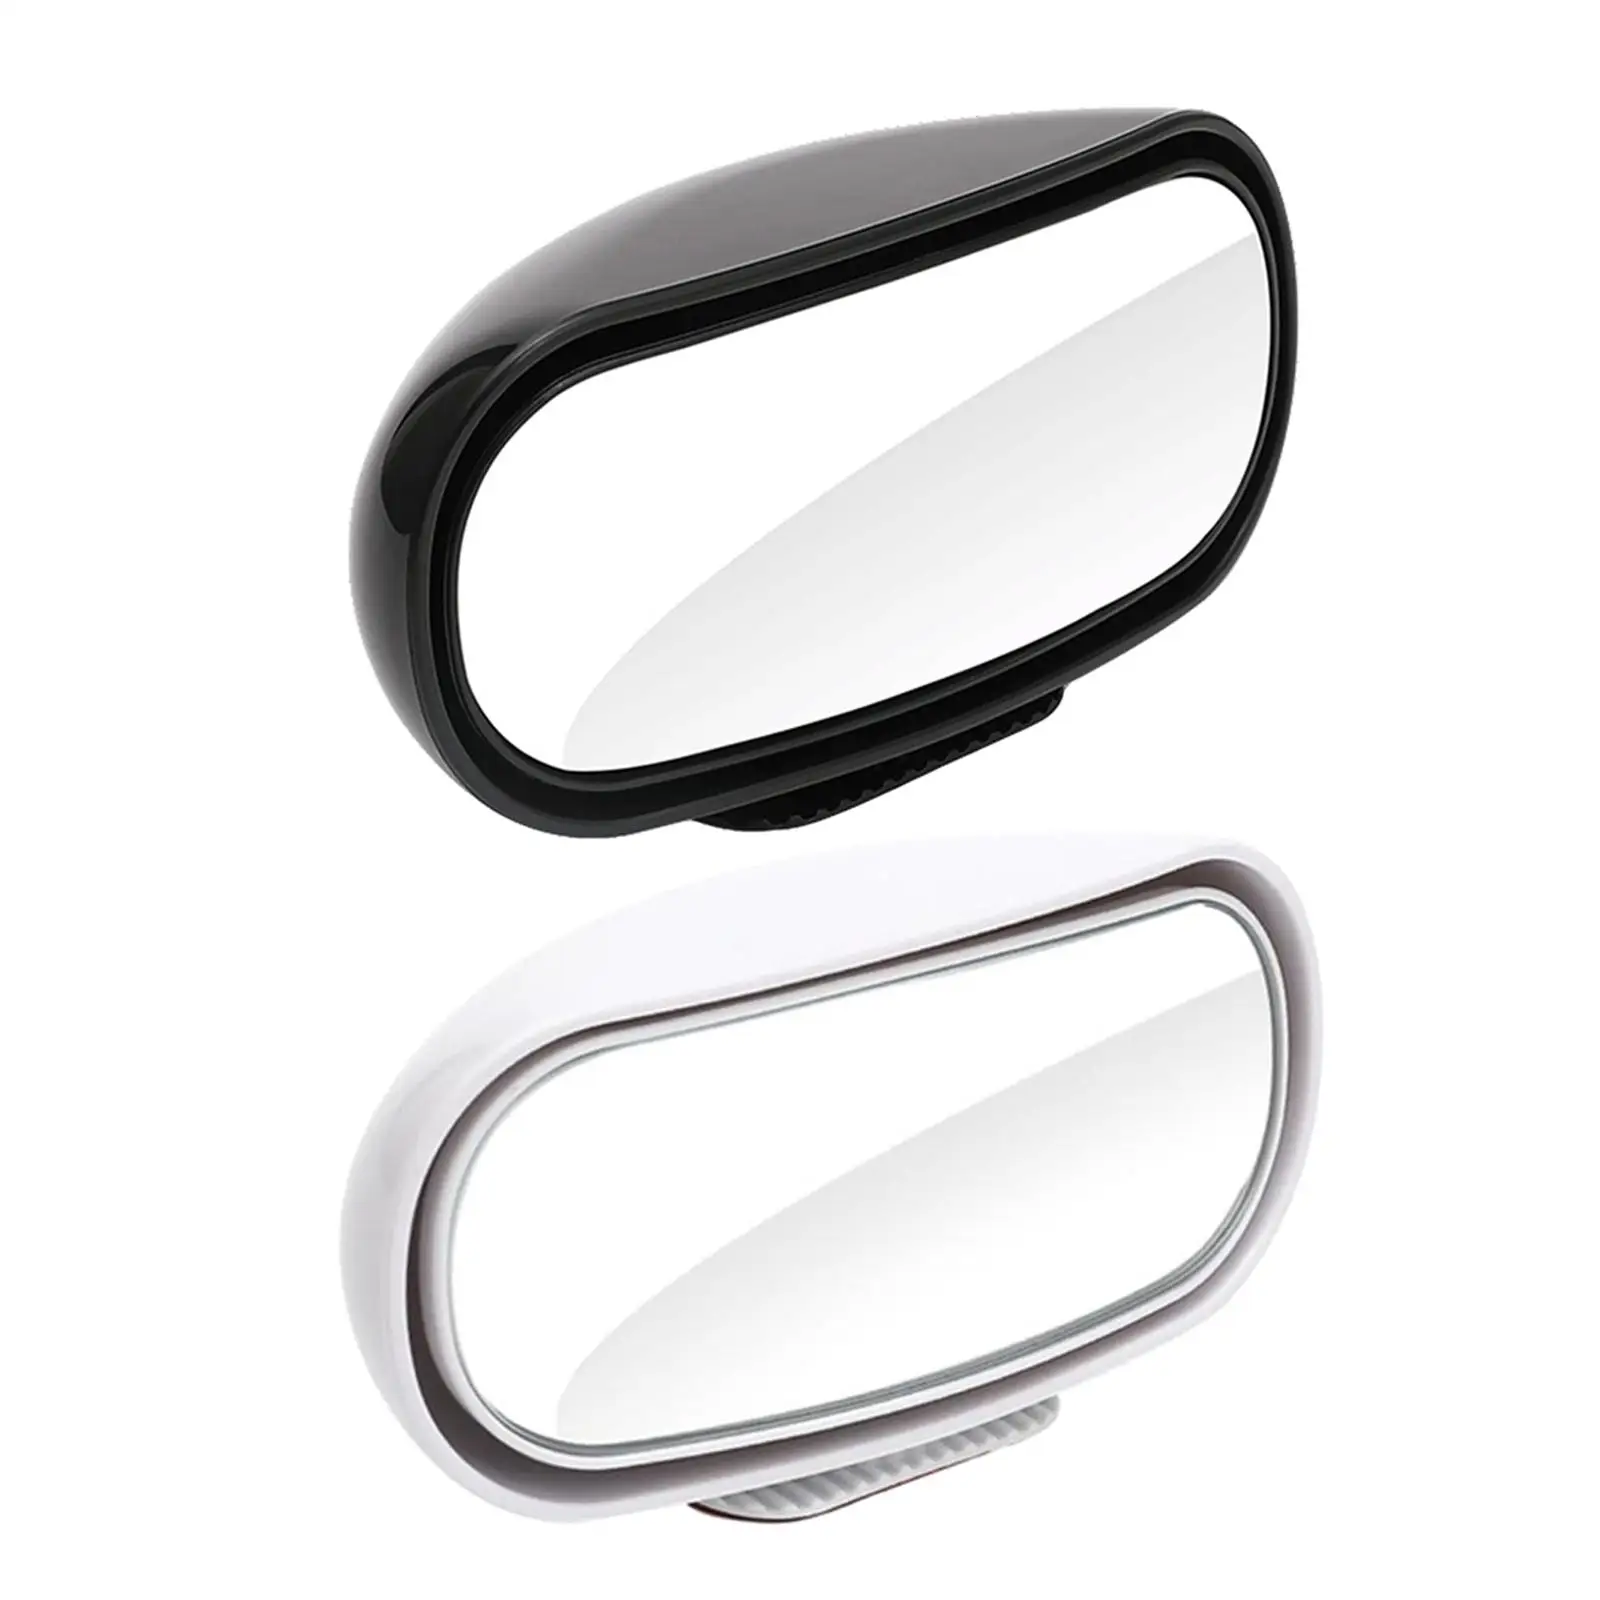 Universal HD360 Car Wide Angle Convex Rear Side View Blind Spot Mirror